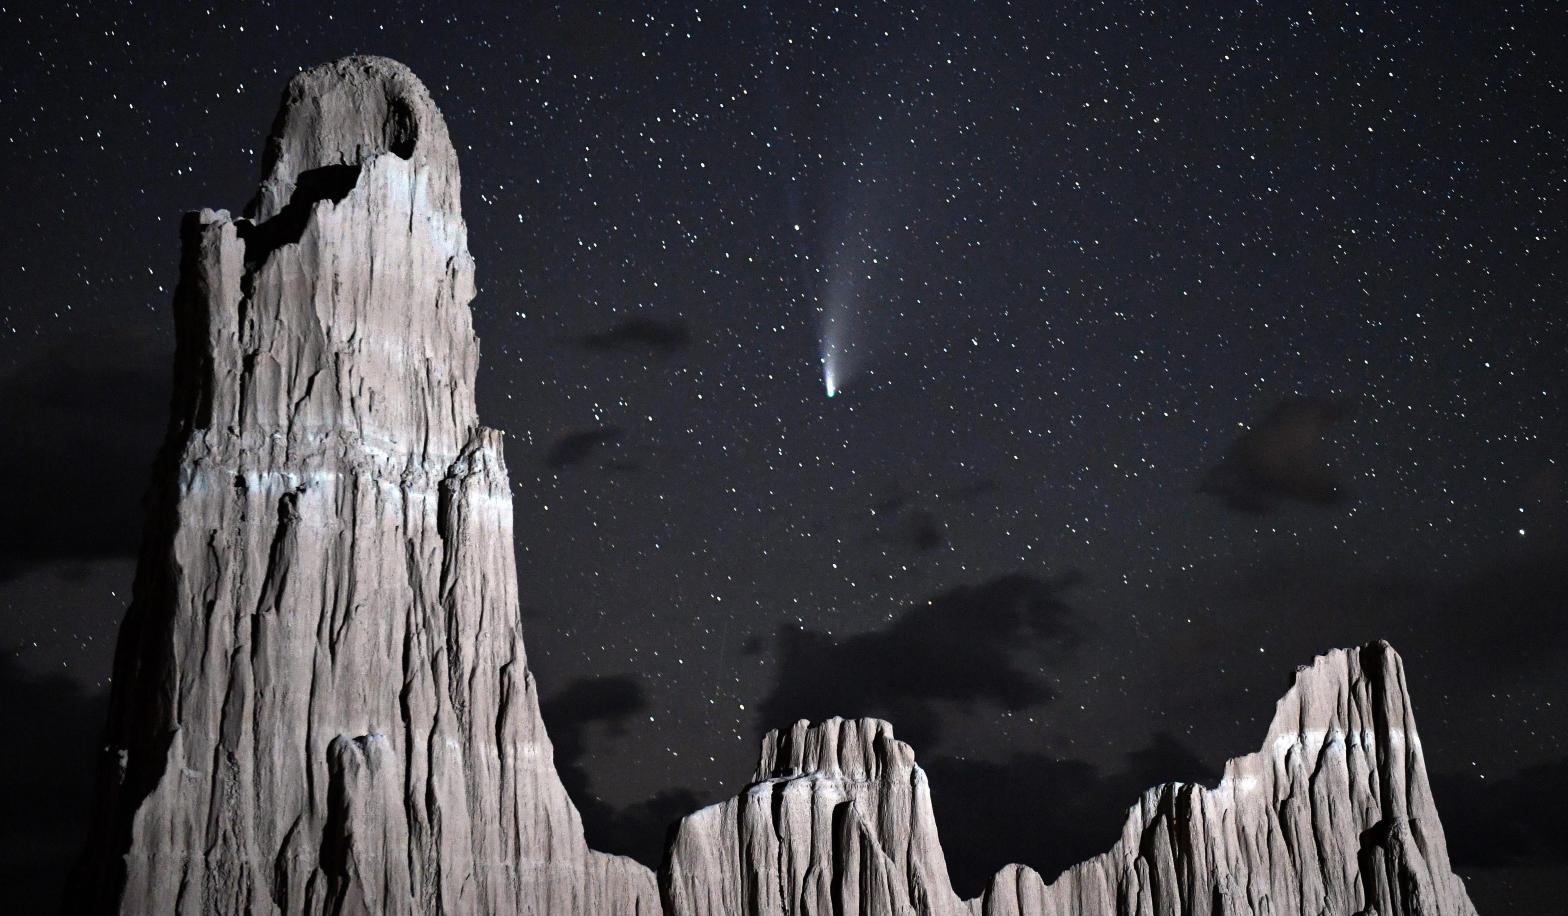 The comet NEOWISE seen over Nevada in 2020. (Image: Ethan Miller, Getty Images)